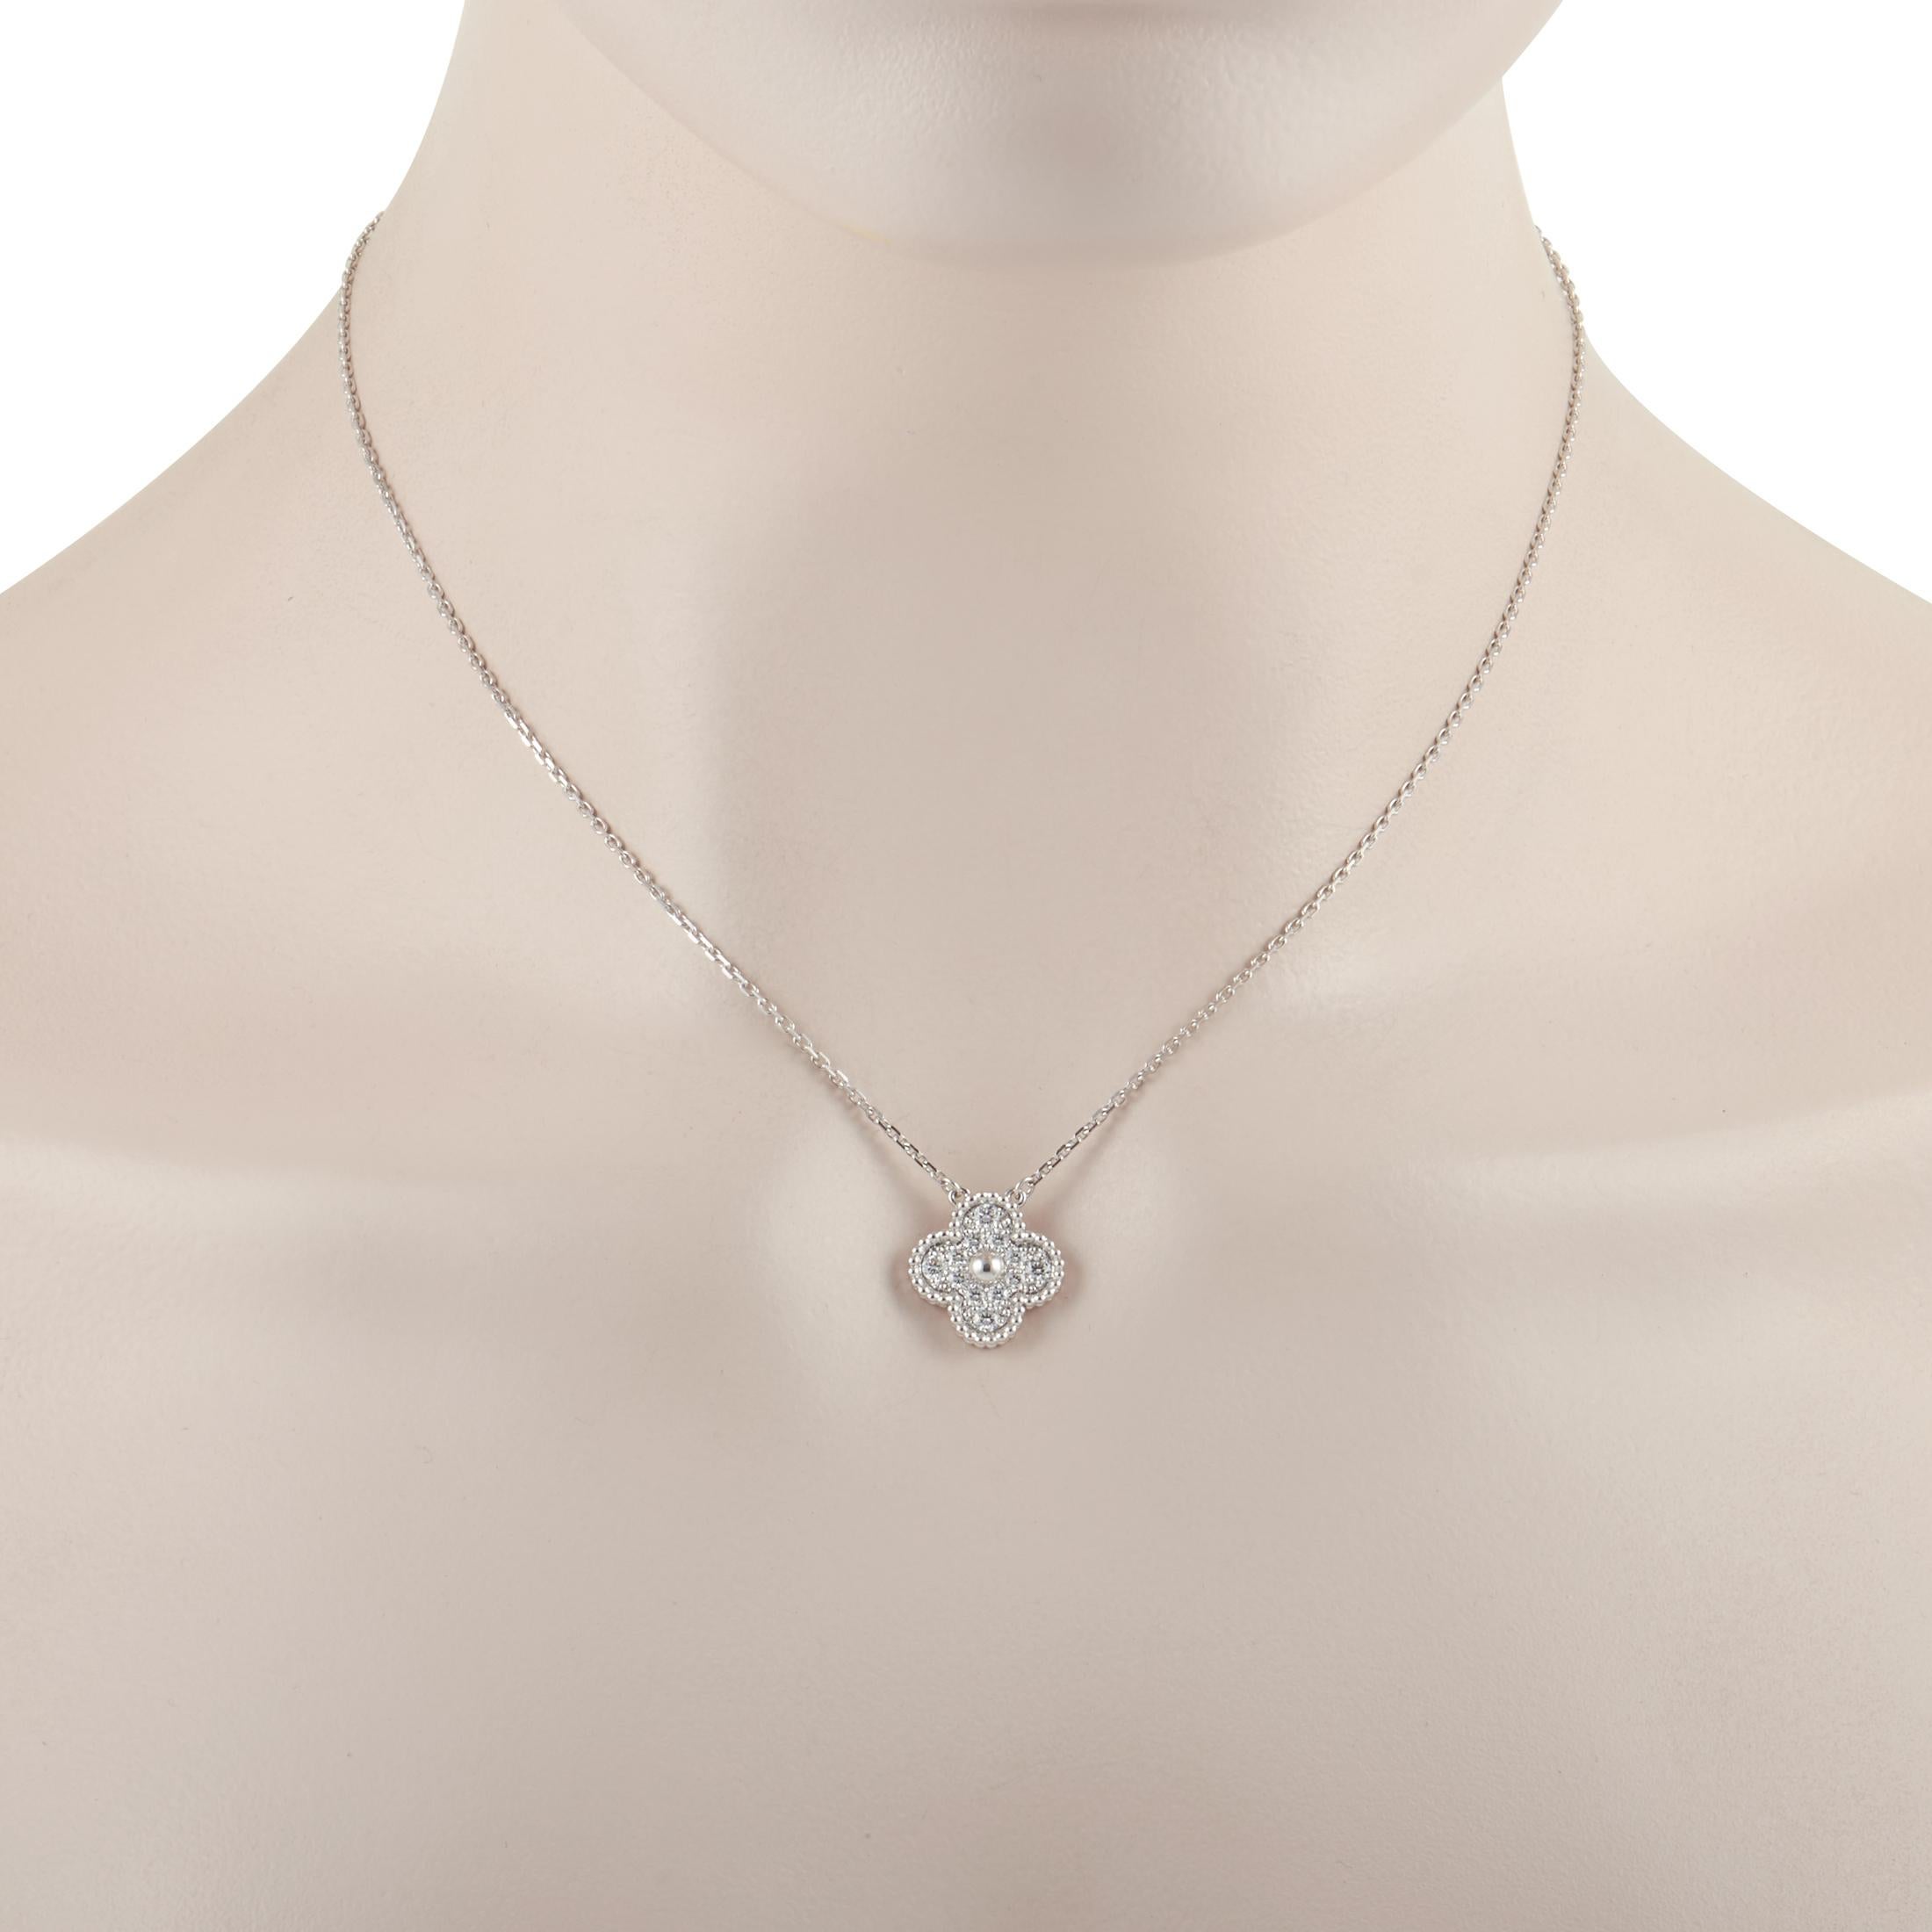 Luxury comes to life on this charming, dainty Alhambra Pendant Necklace from Van Cleef & Arpels. Glittering diamonds totaling 0.48 carats sparkle and shine from their place within the 18K White Gold setting, which is shaped like the high-end brand’s